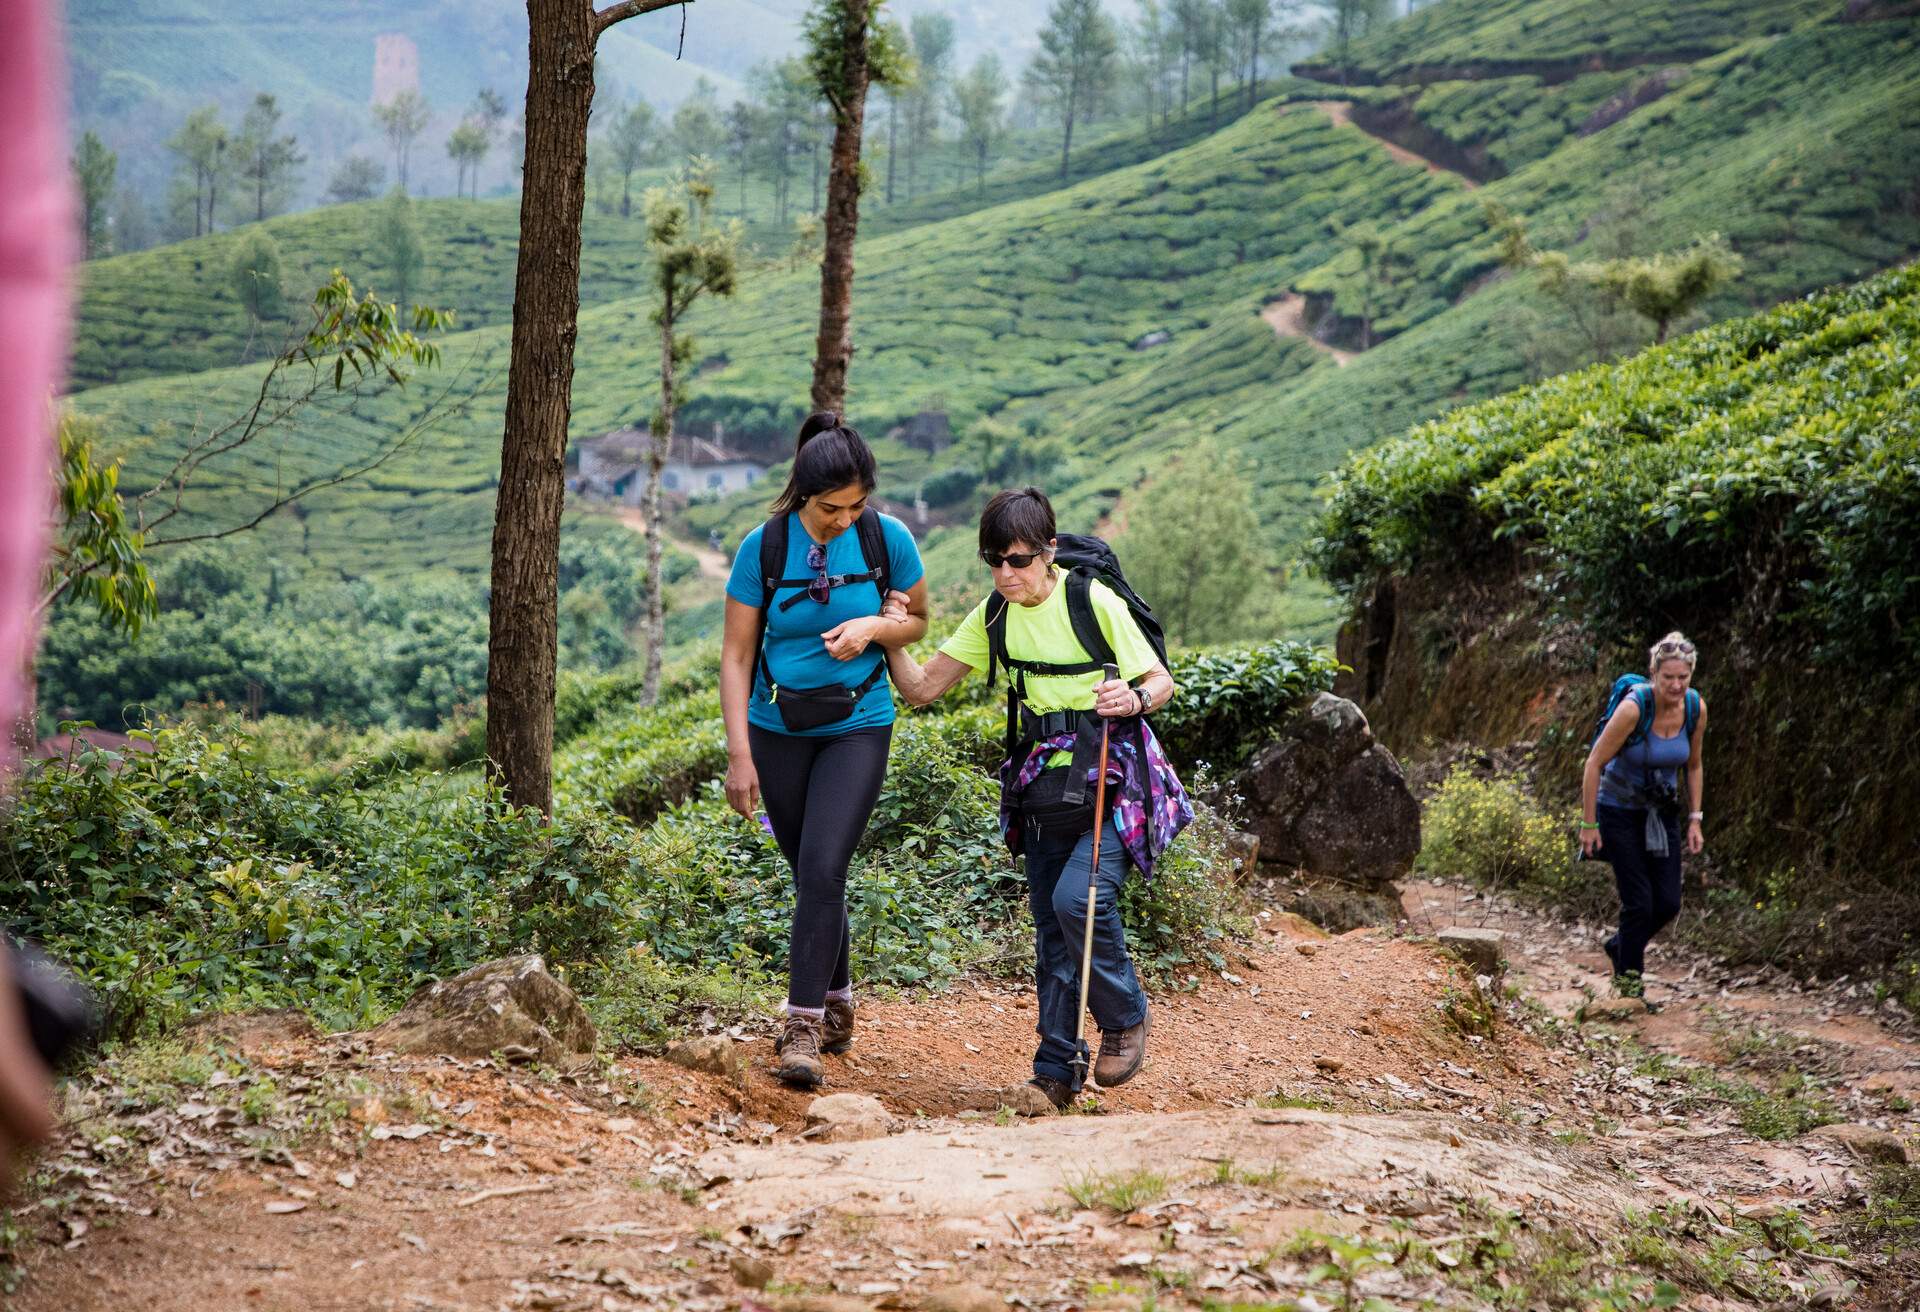 INDIA_MUNNAR_THEME_TRAVEL_HIKING_BLIND_DISABILITY_OUTDOORS